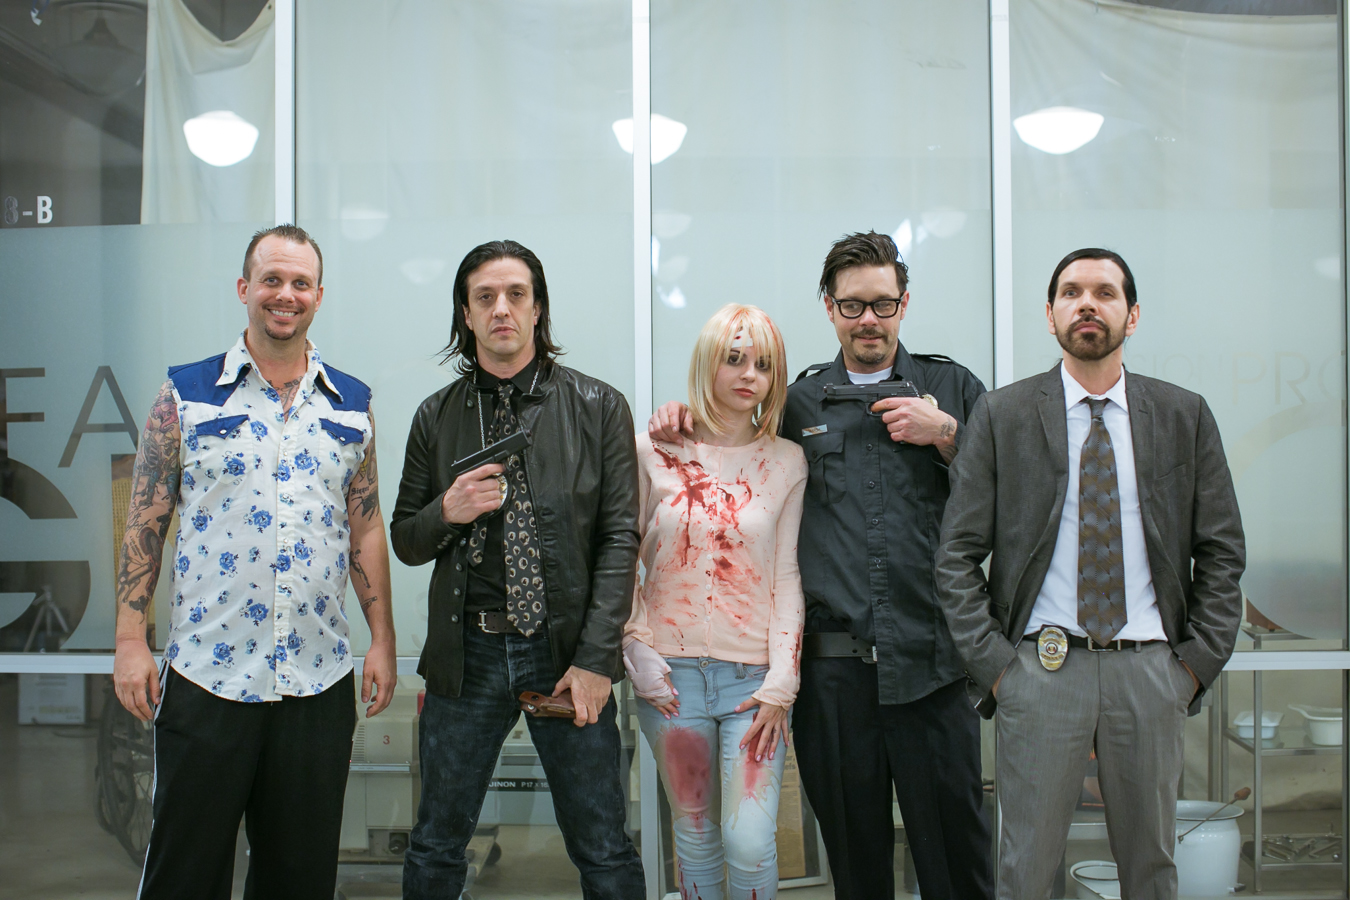 Pandie Suicide on set of MASSACRE (2015) with Jeff Hilliard, Jeordie White, Rob Patterson and London May